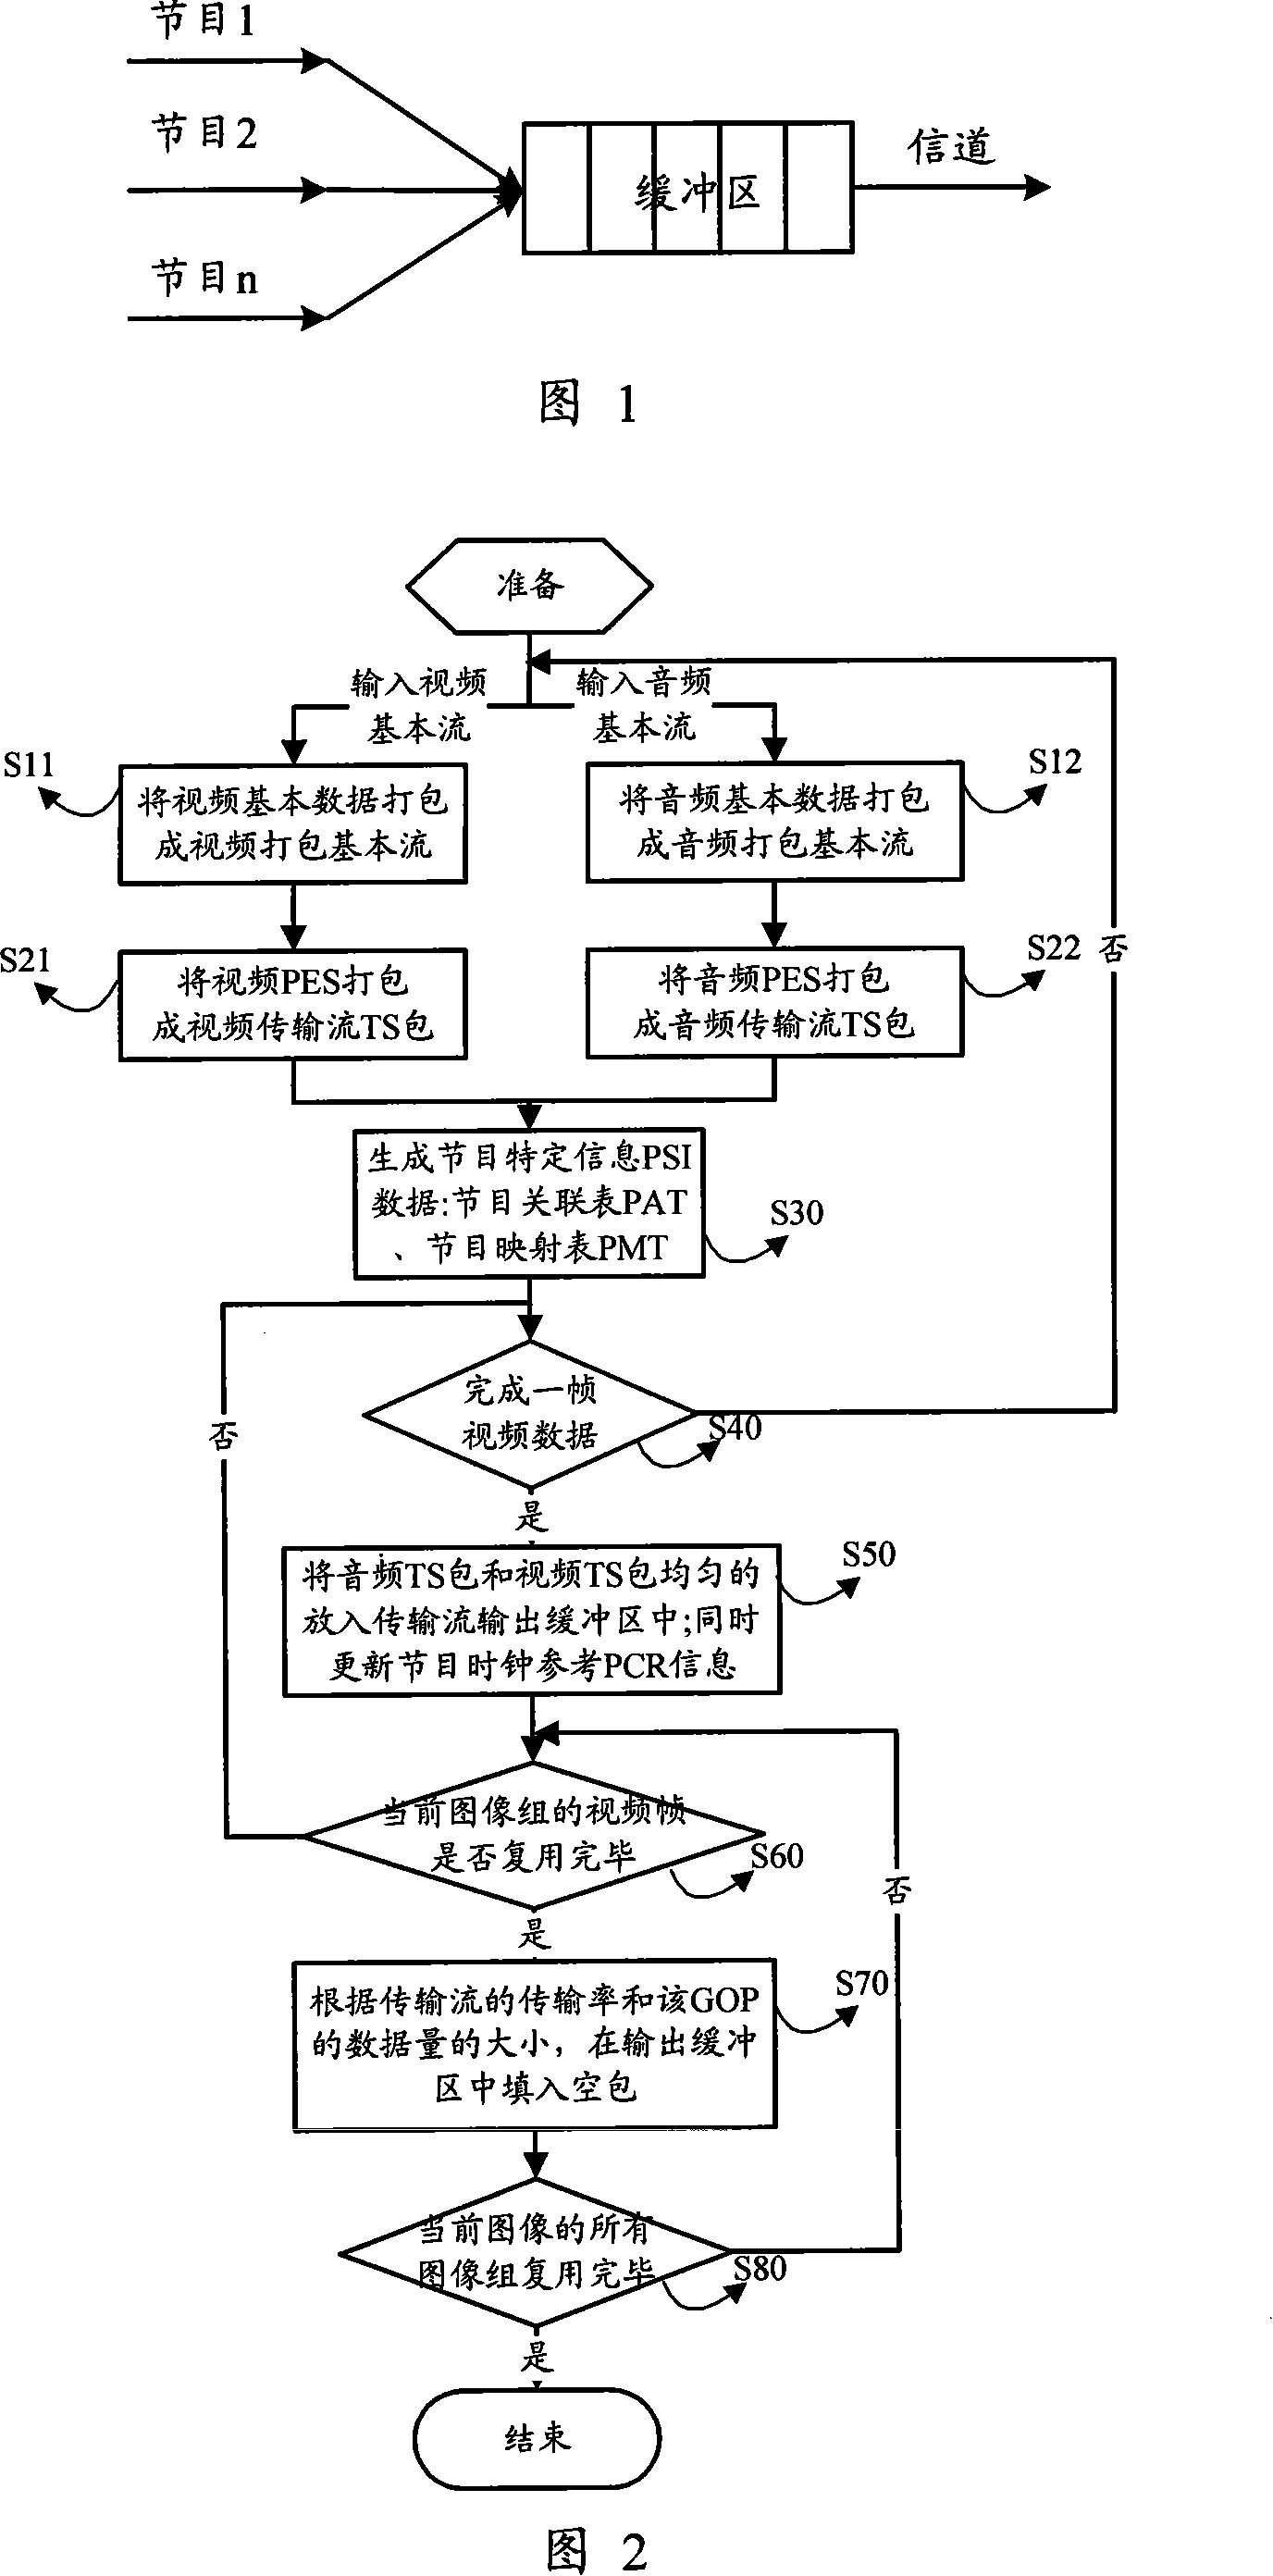 Low-delay real-time transport stream multiplexing method